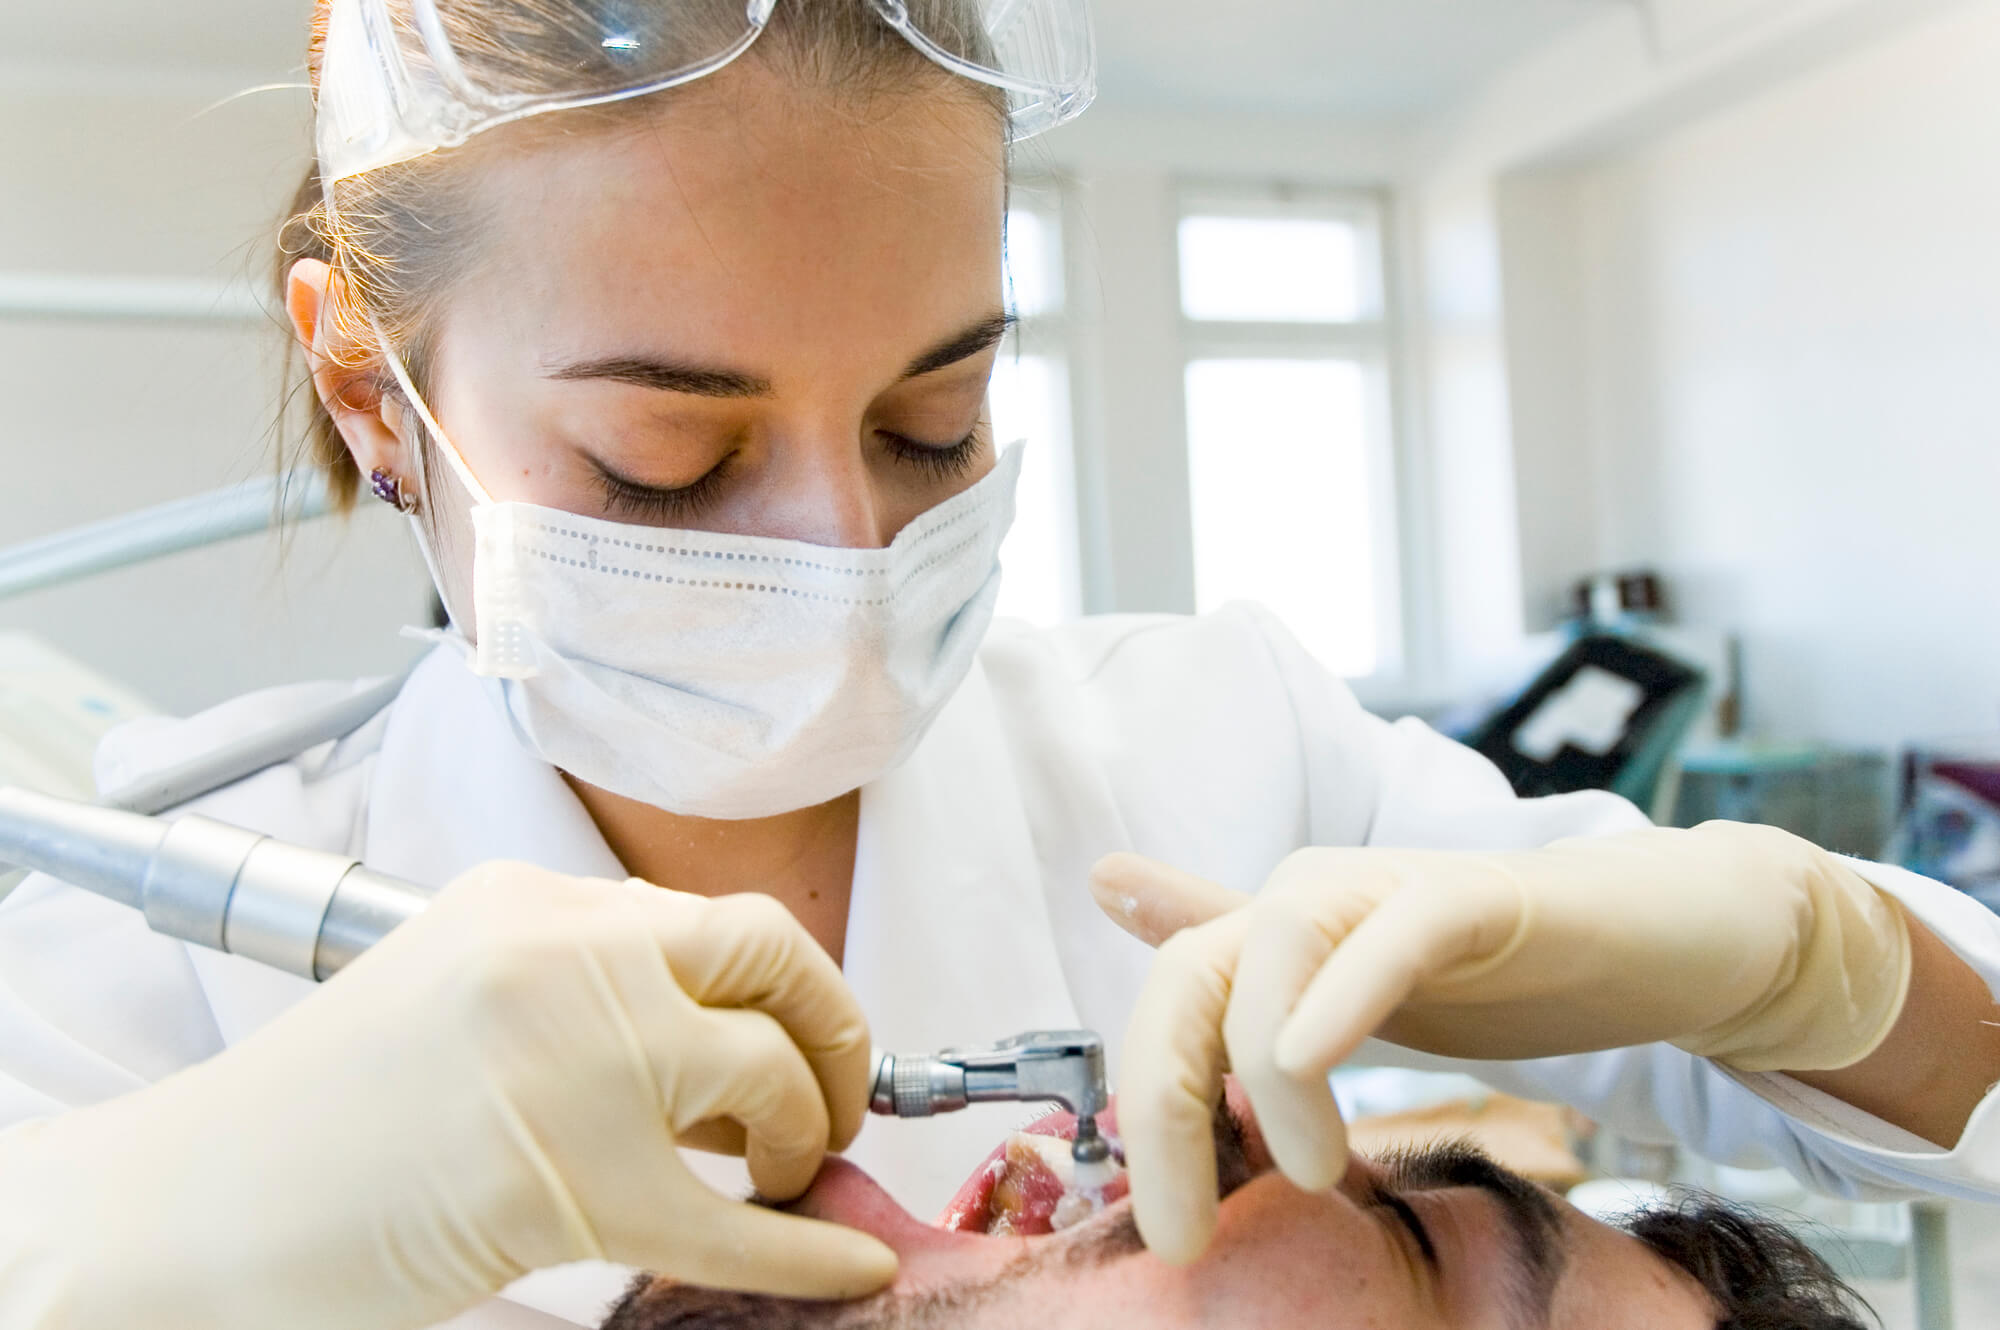 How do I find sedation dentistry in Miami?